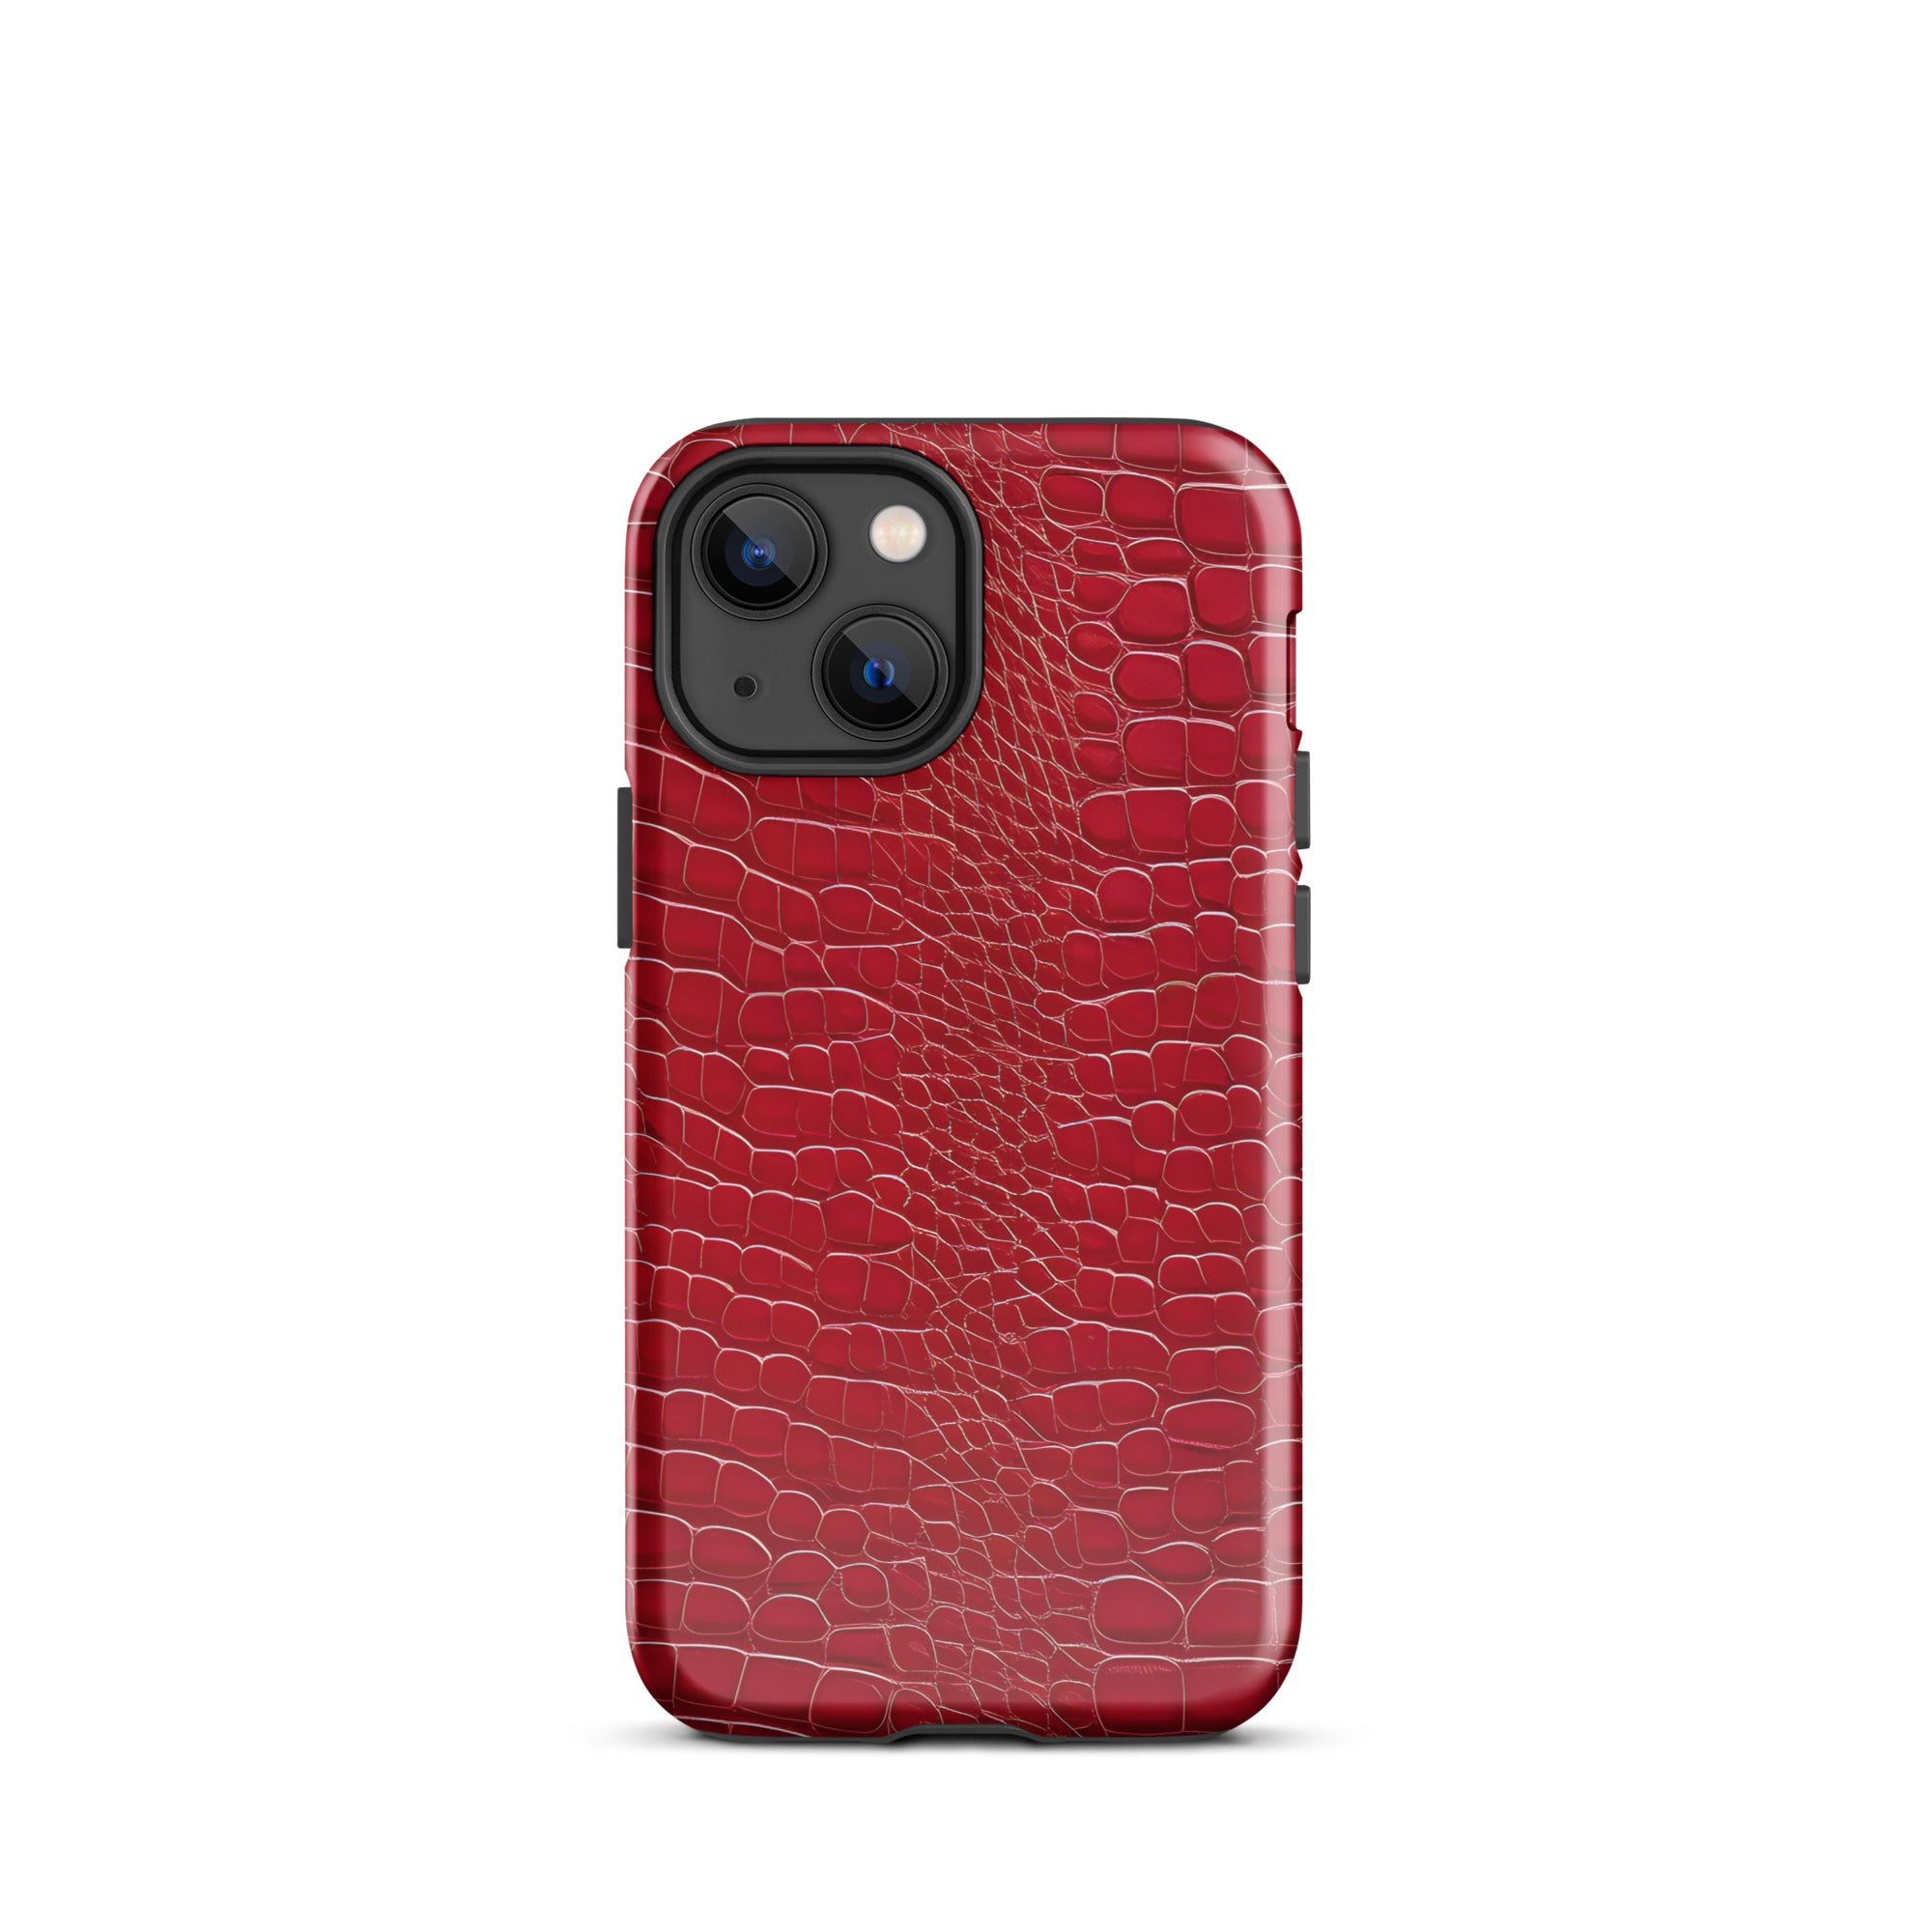 tough-case-for-iphone-glossy-iphone-13-mini-front-656383d5b58af.jpg